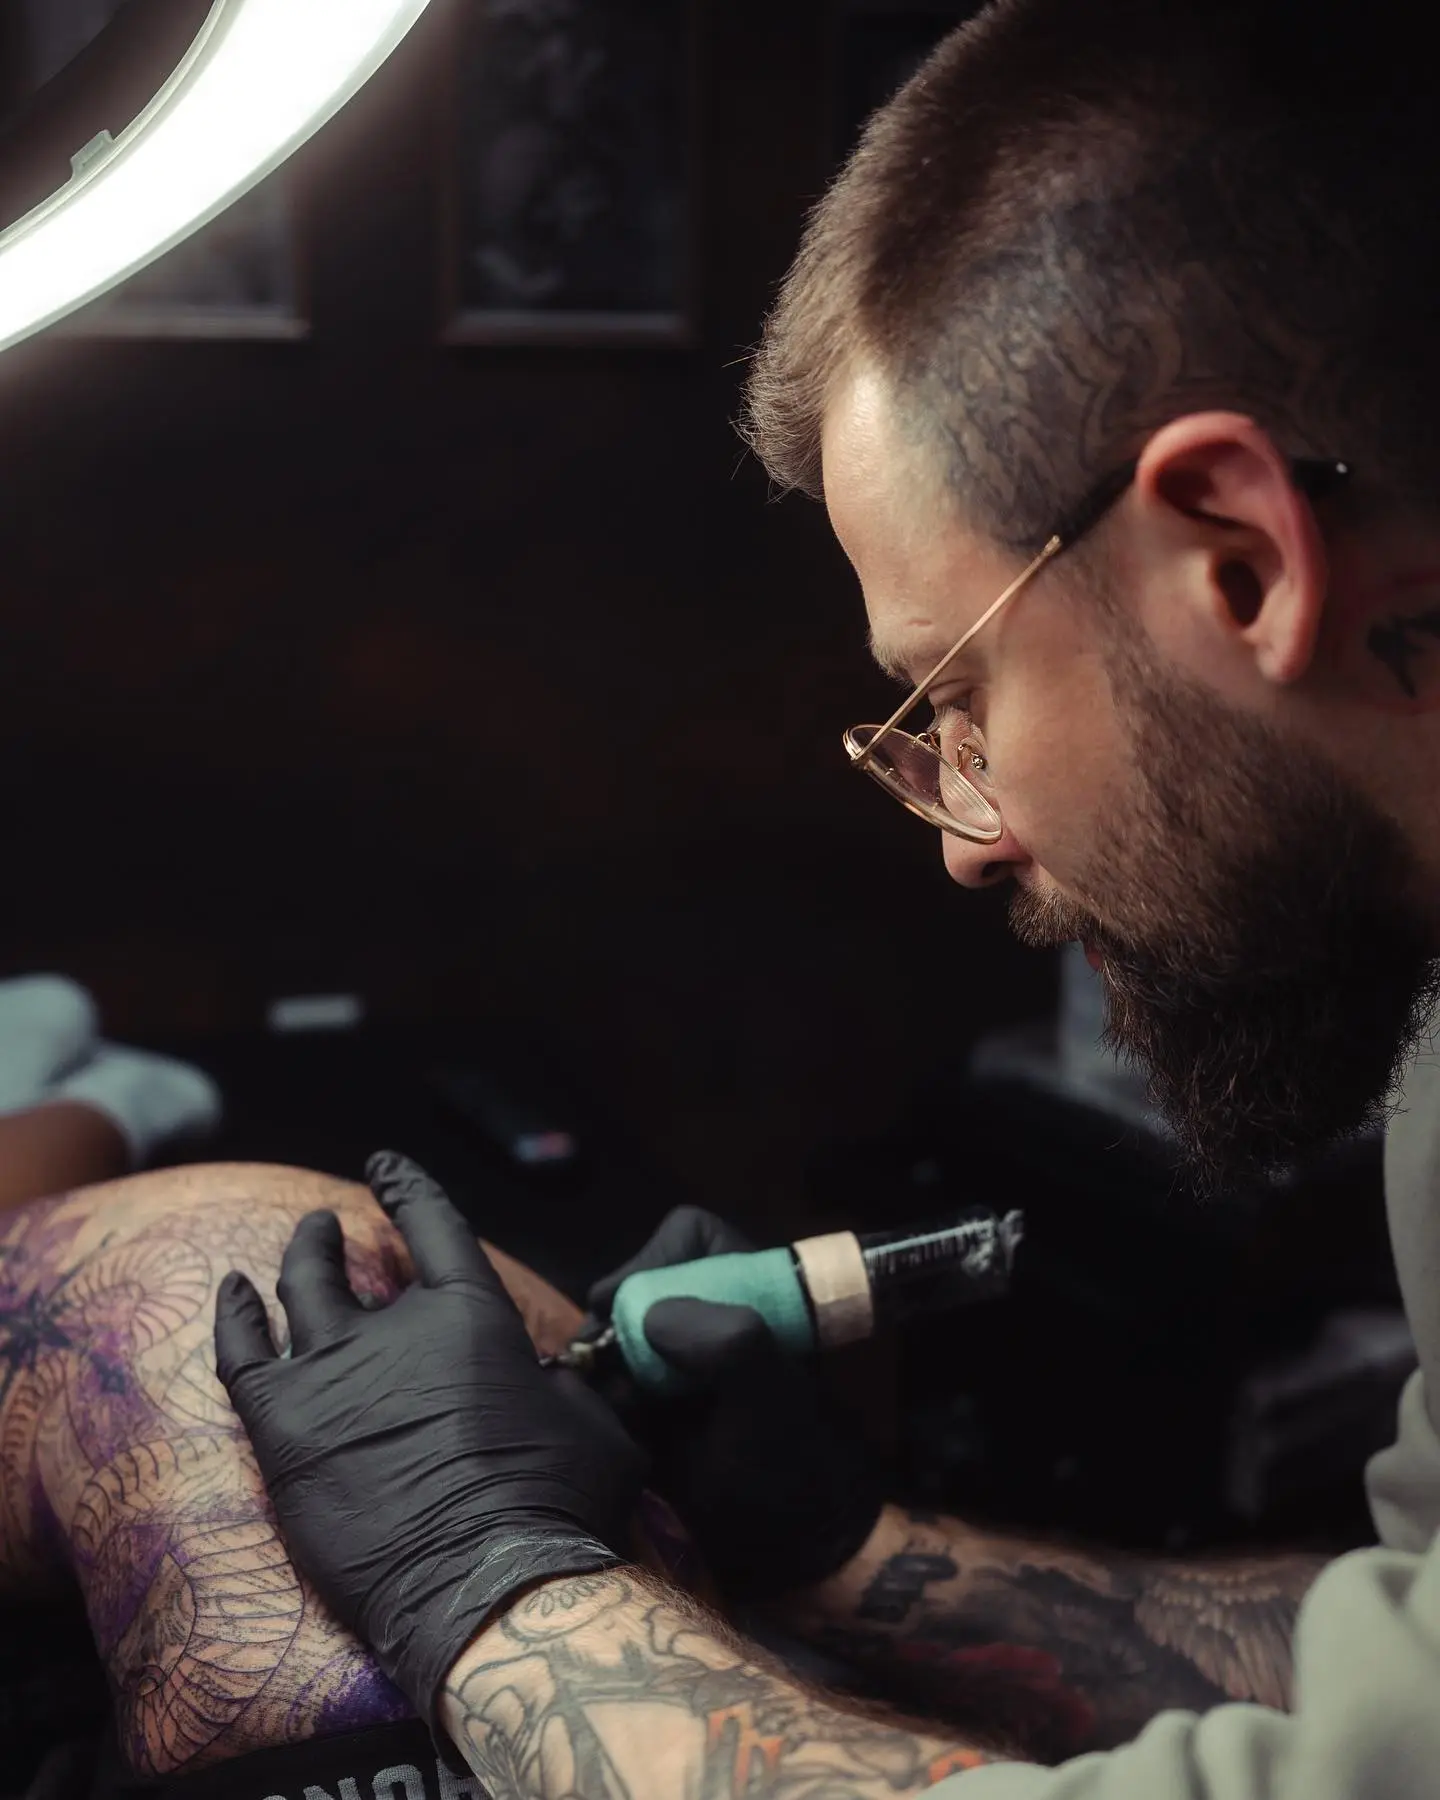 Factors Influencing the Cost of Tattoos